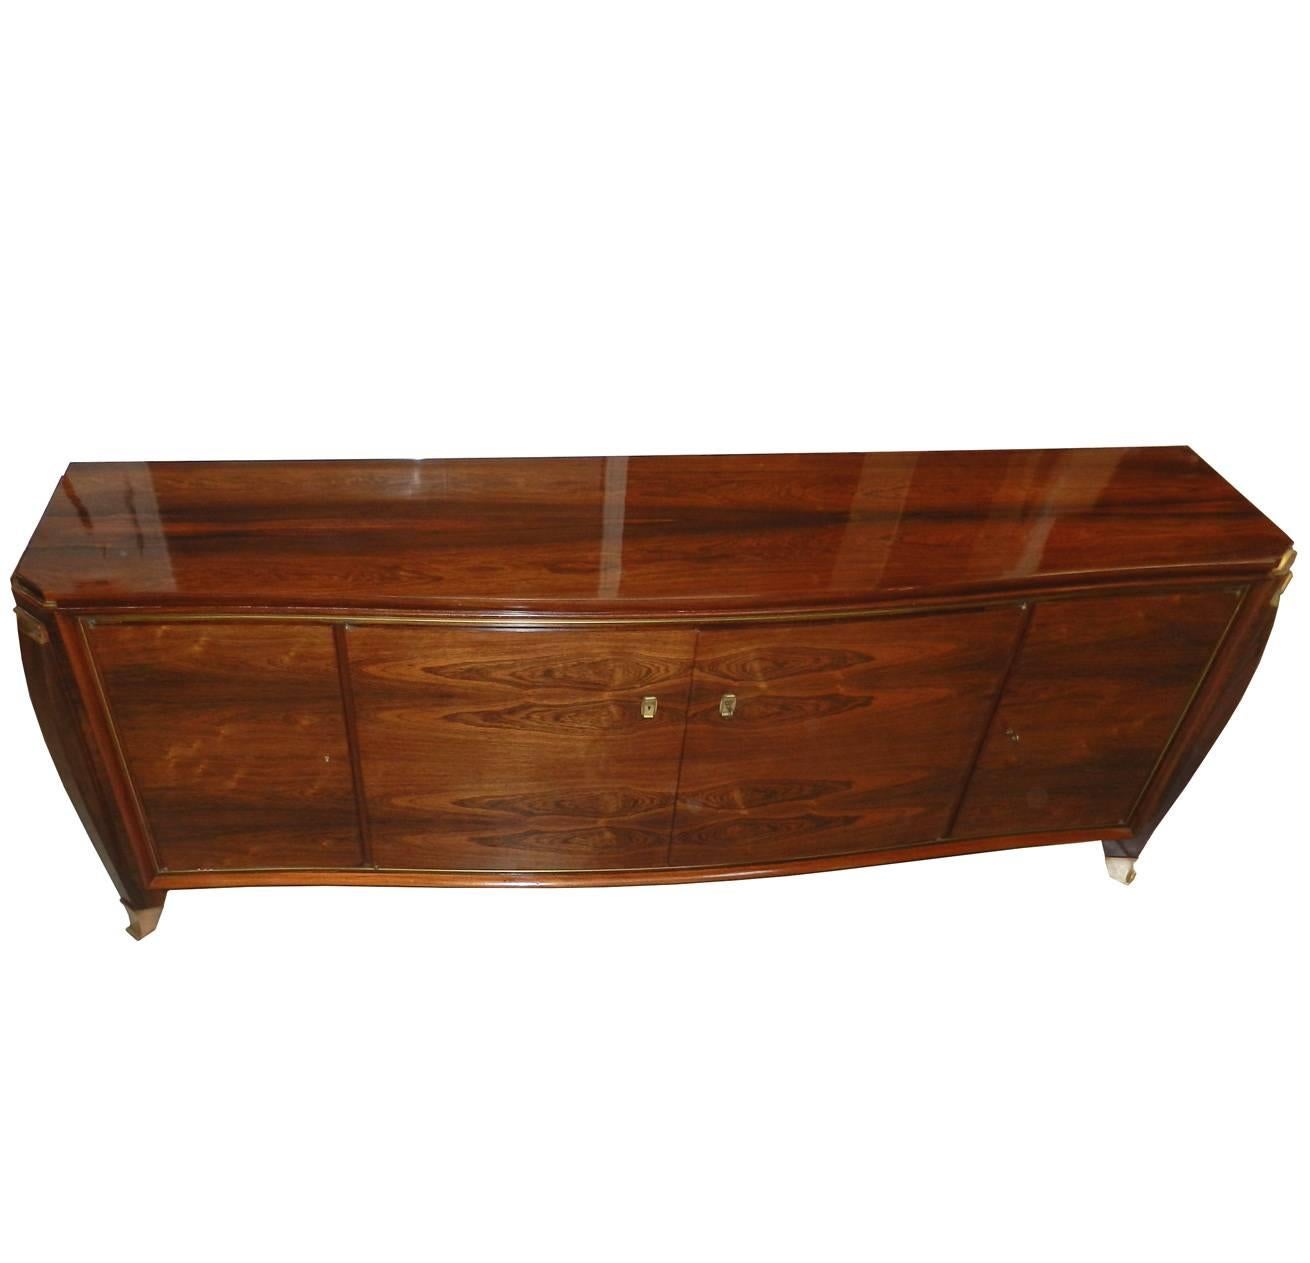 Maurice Rinck, large sideboard in rosewood veneer and gilt bronze.
Fully restored, French varnish,
circa 1930.